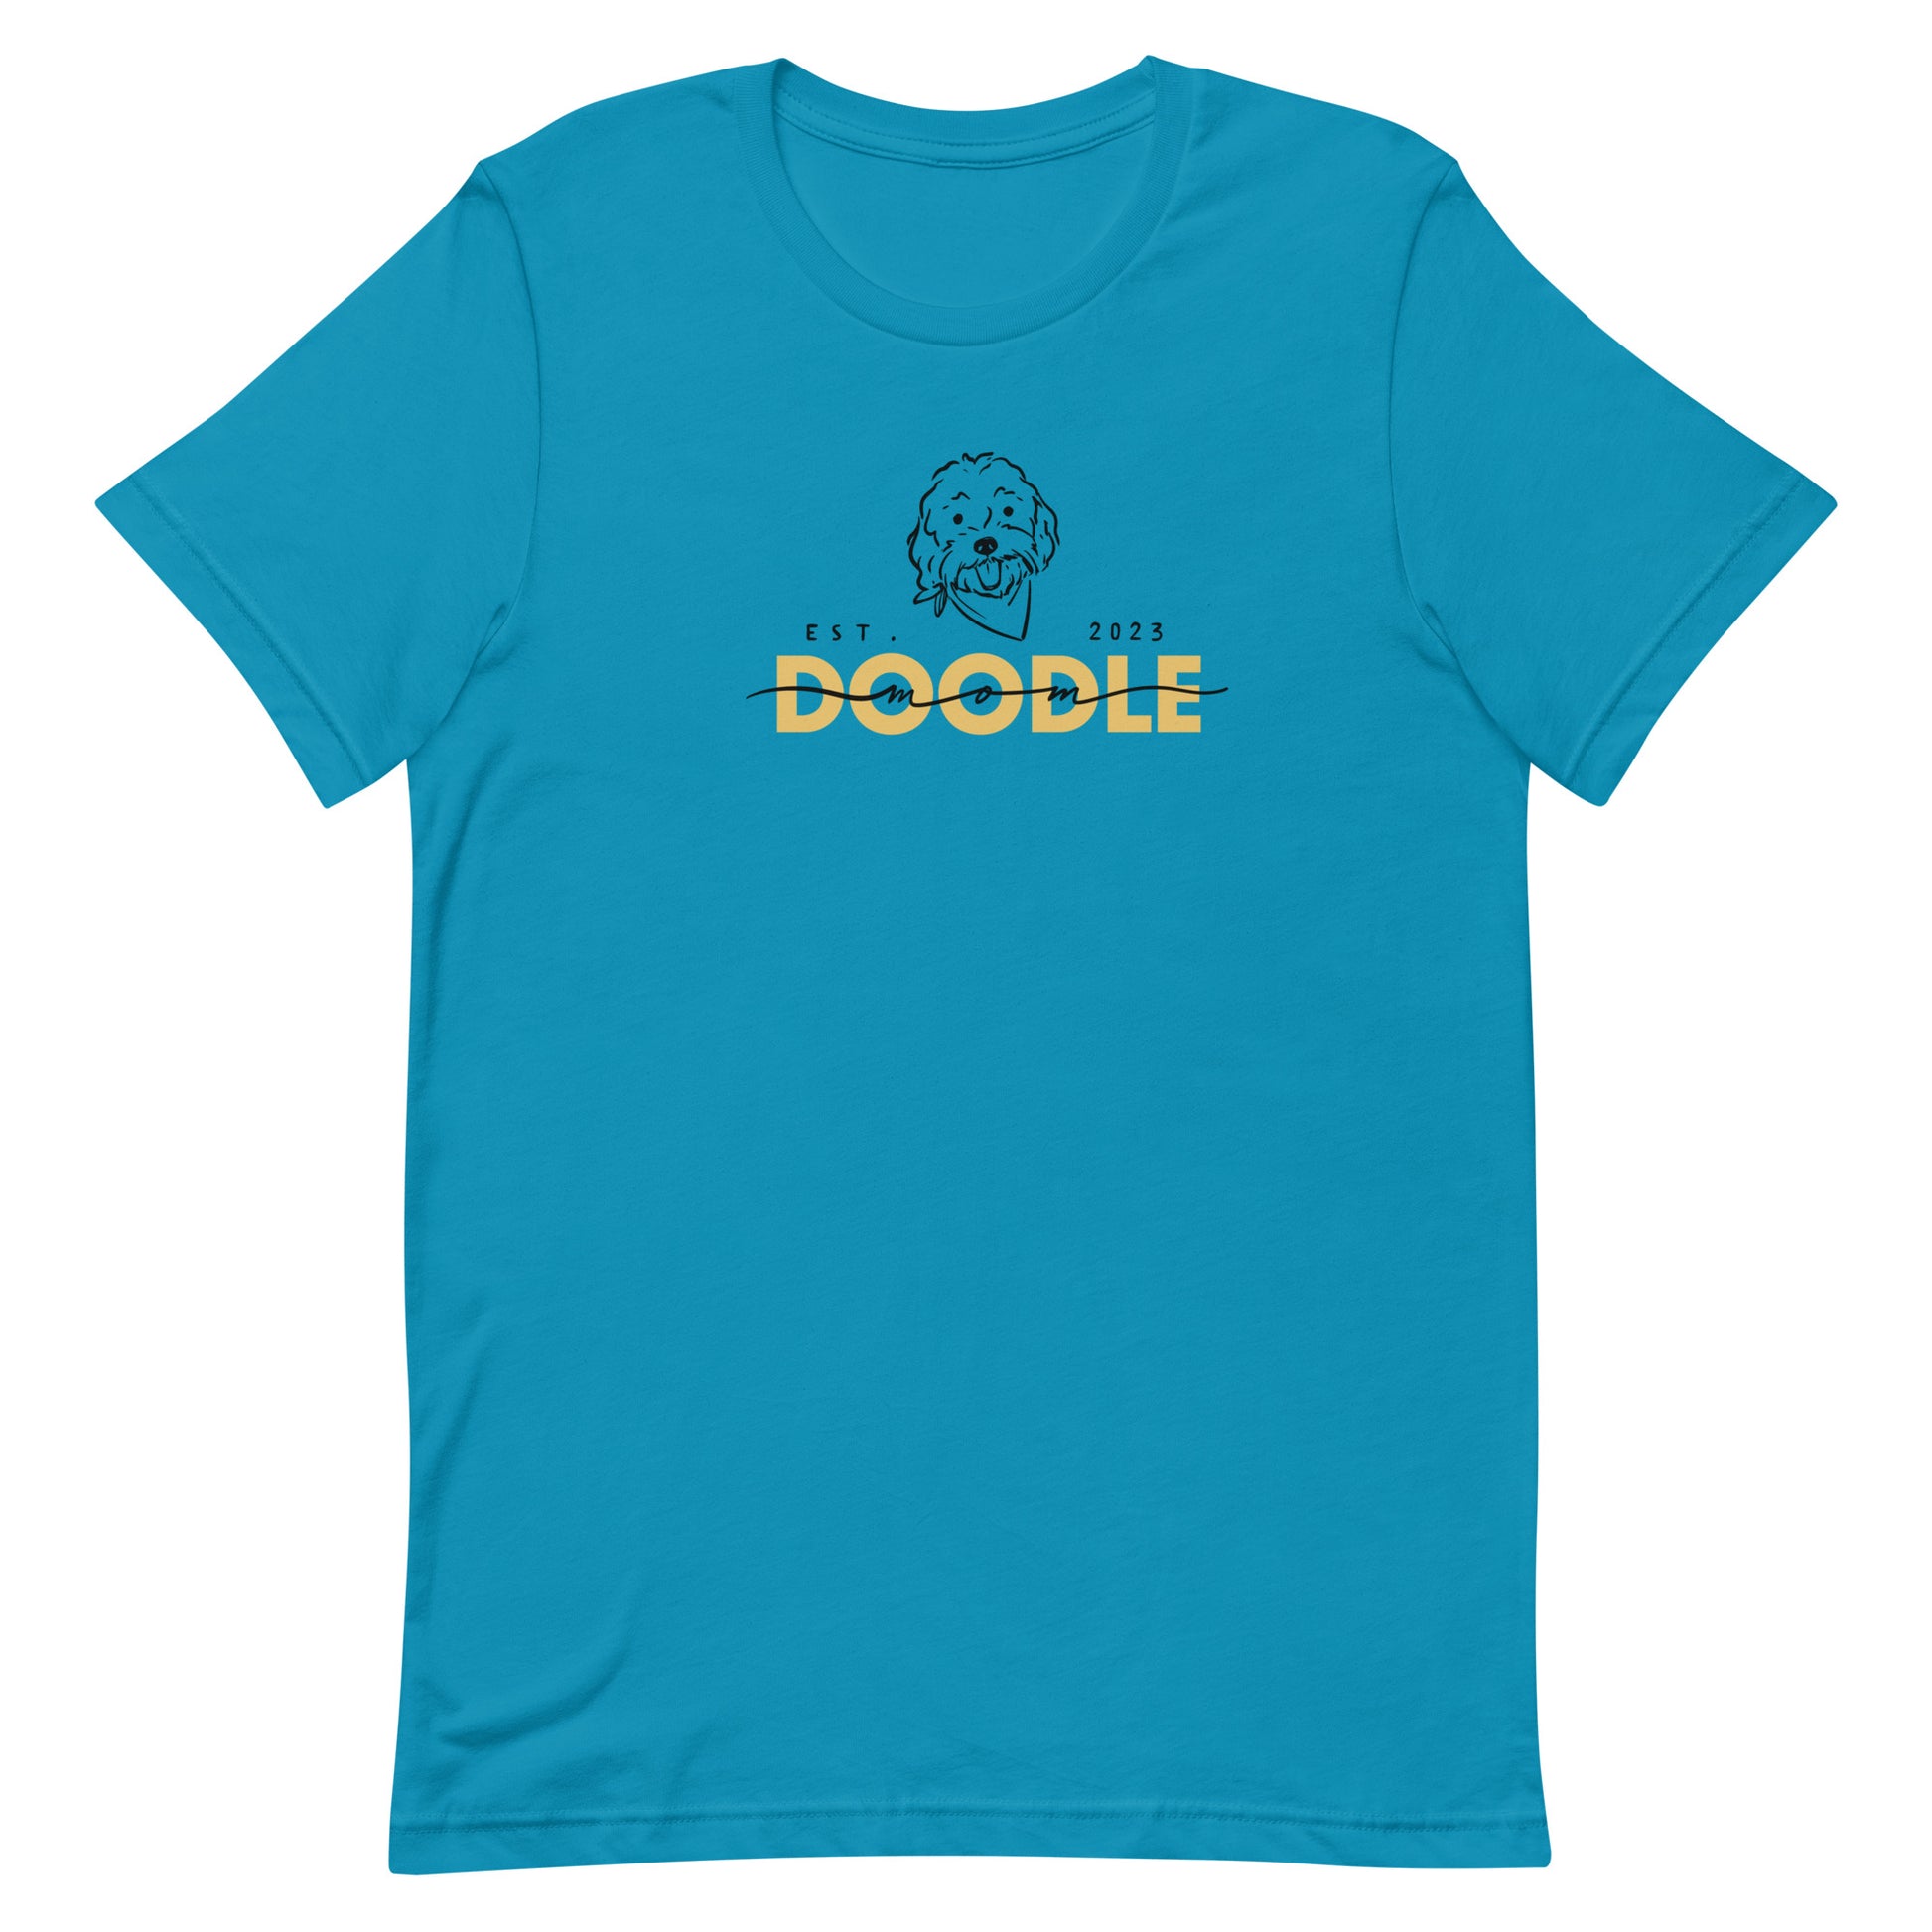 Goldendoodle Mom t-shirt with Goldendoodle face and words "Doodle Mom Est 2023" in aqua color